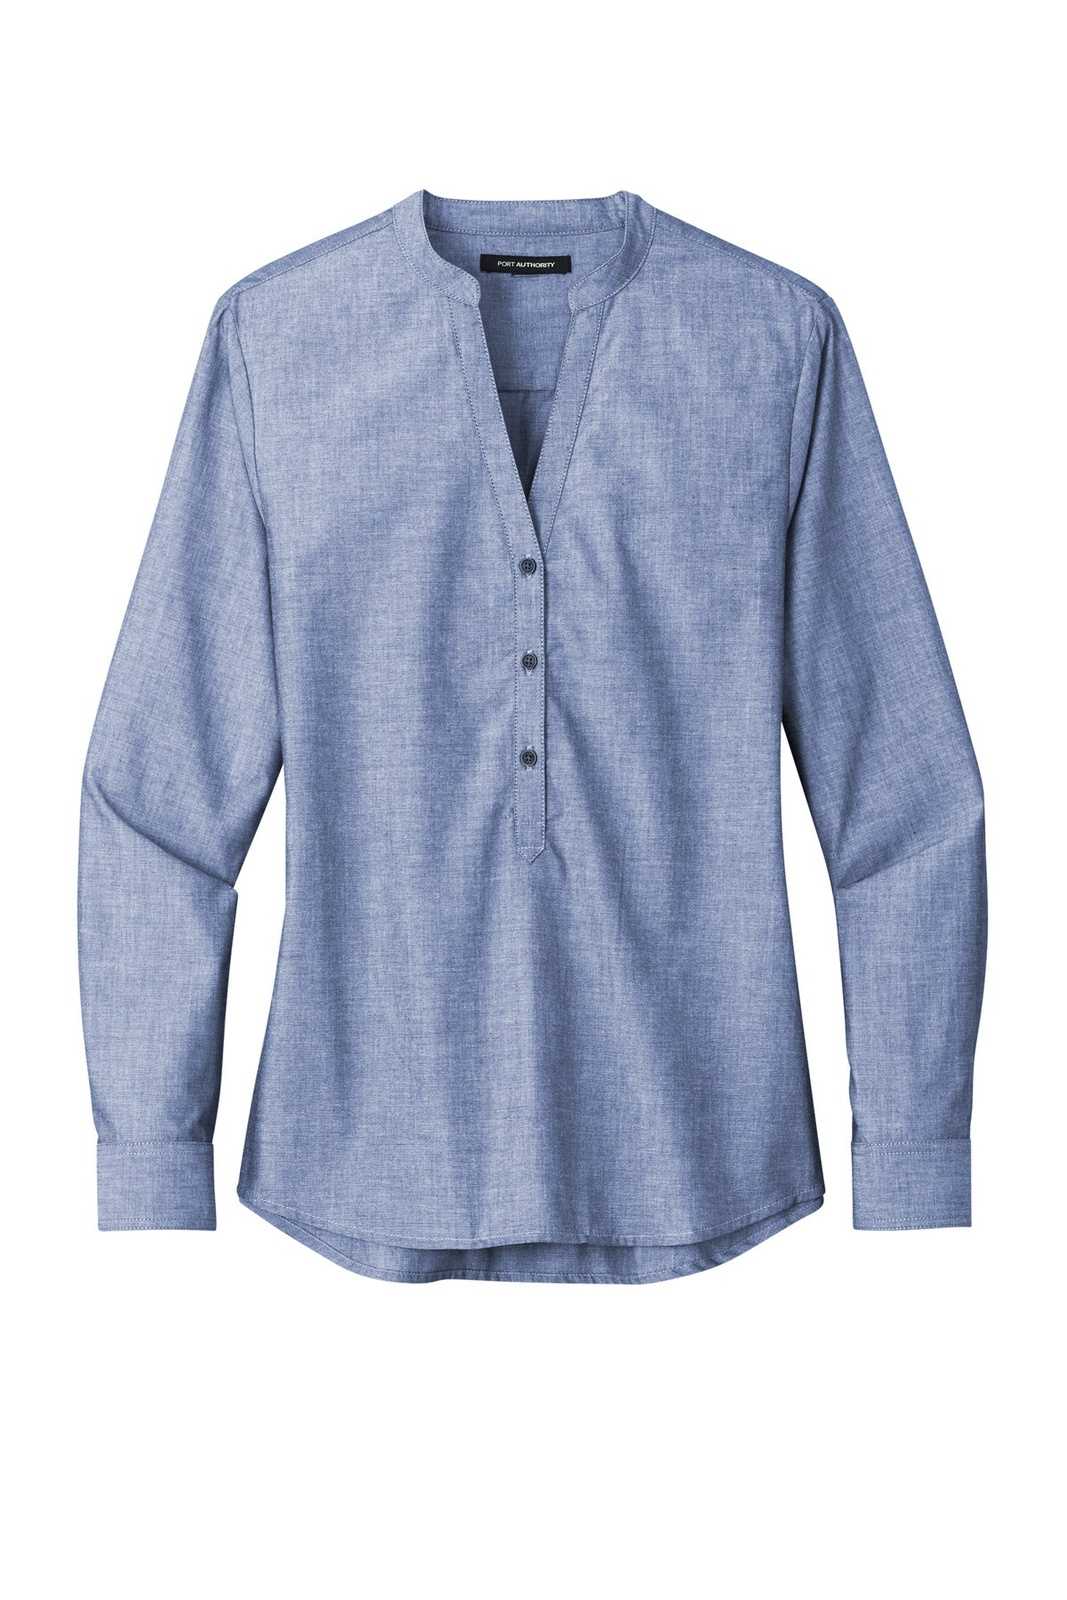 Port Authority LW382 Ladies Long Sleeve Chambray Easy Care Shirt - Moonlight Blue - HIT a Double - 1